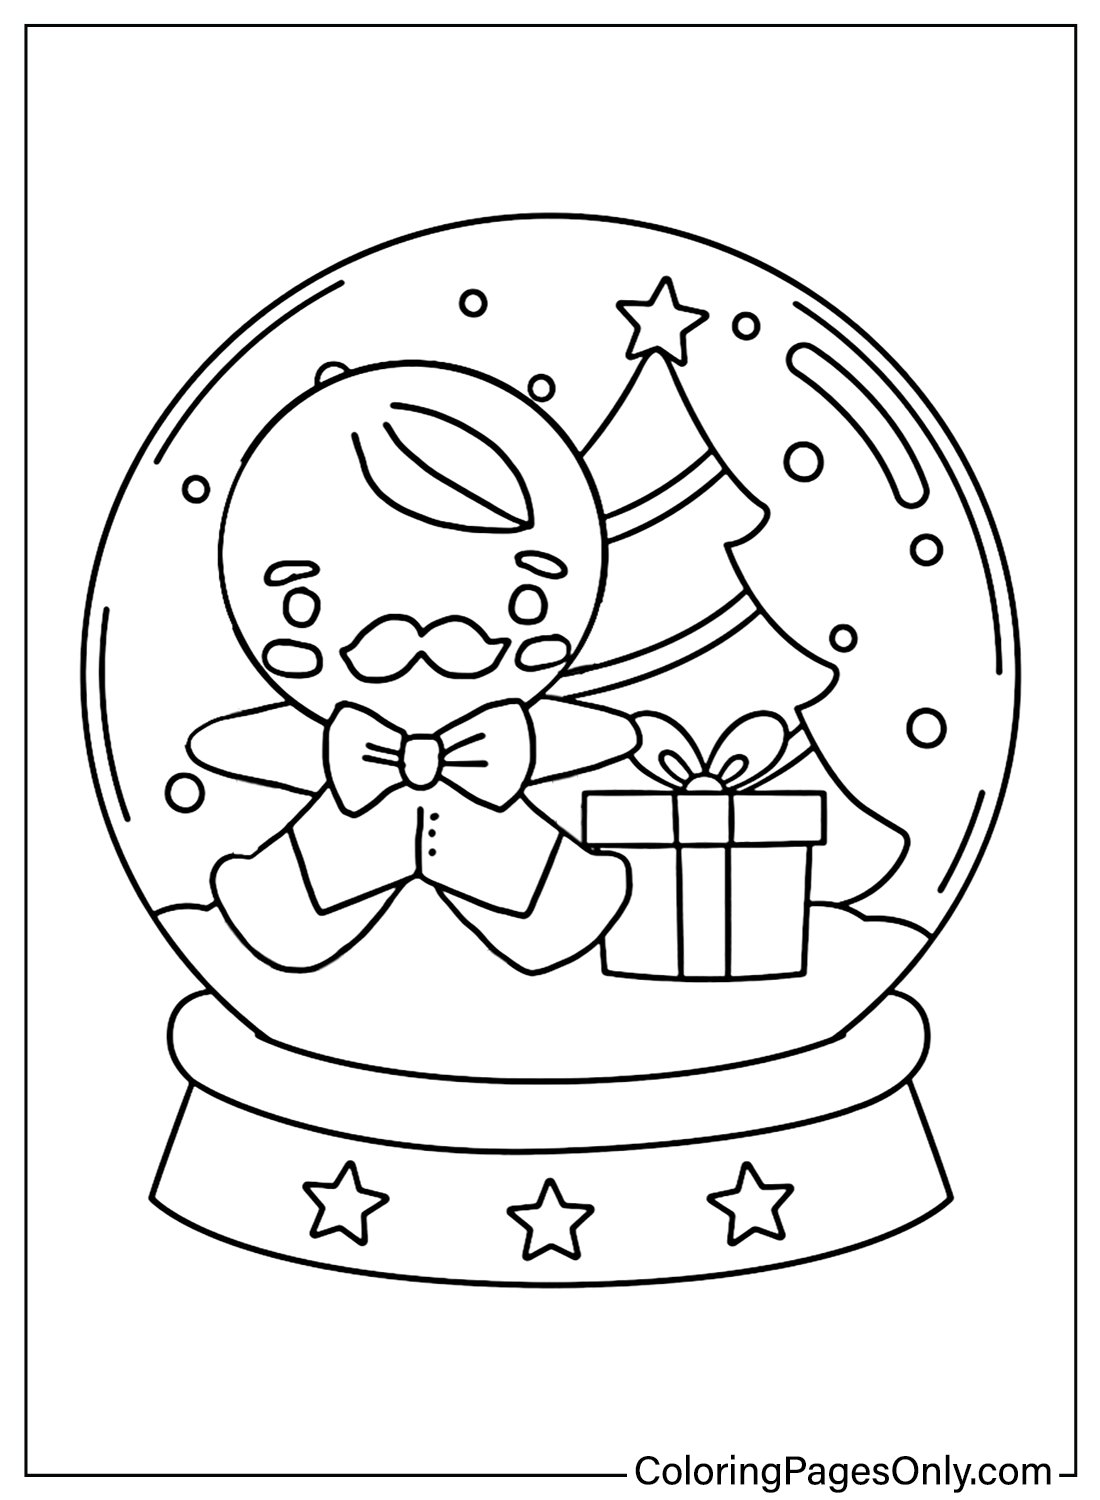 Snow Globe Gingerbread Man Coloring Page - Free Printable Coloring Pages